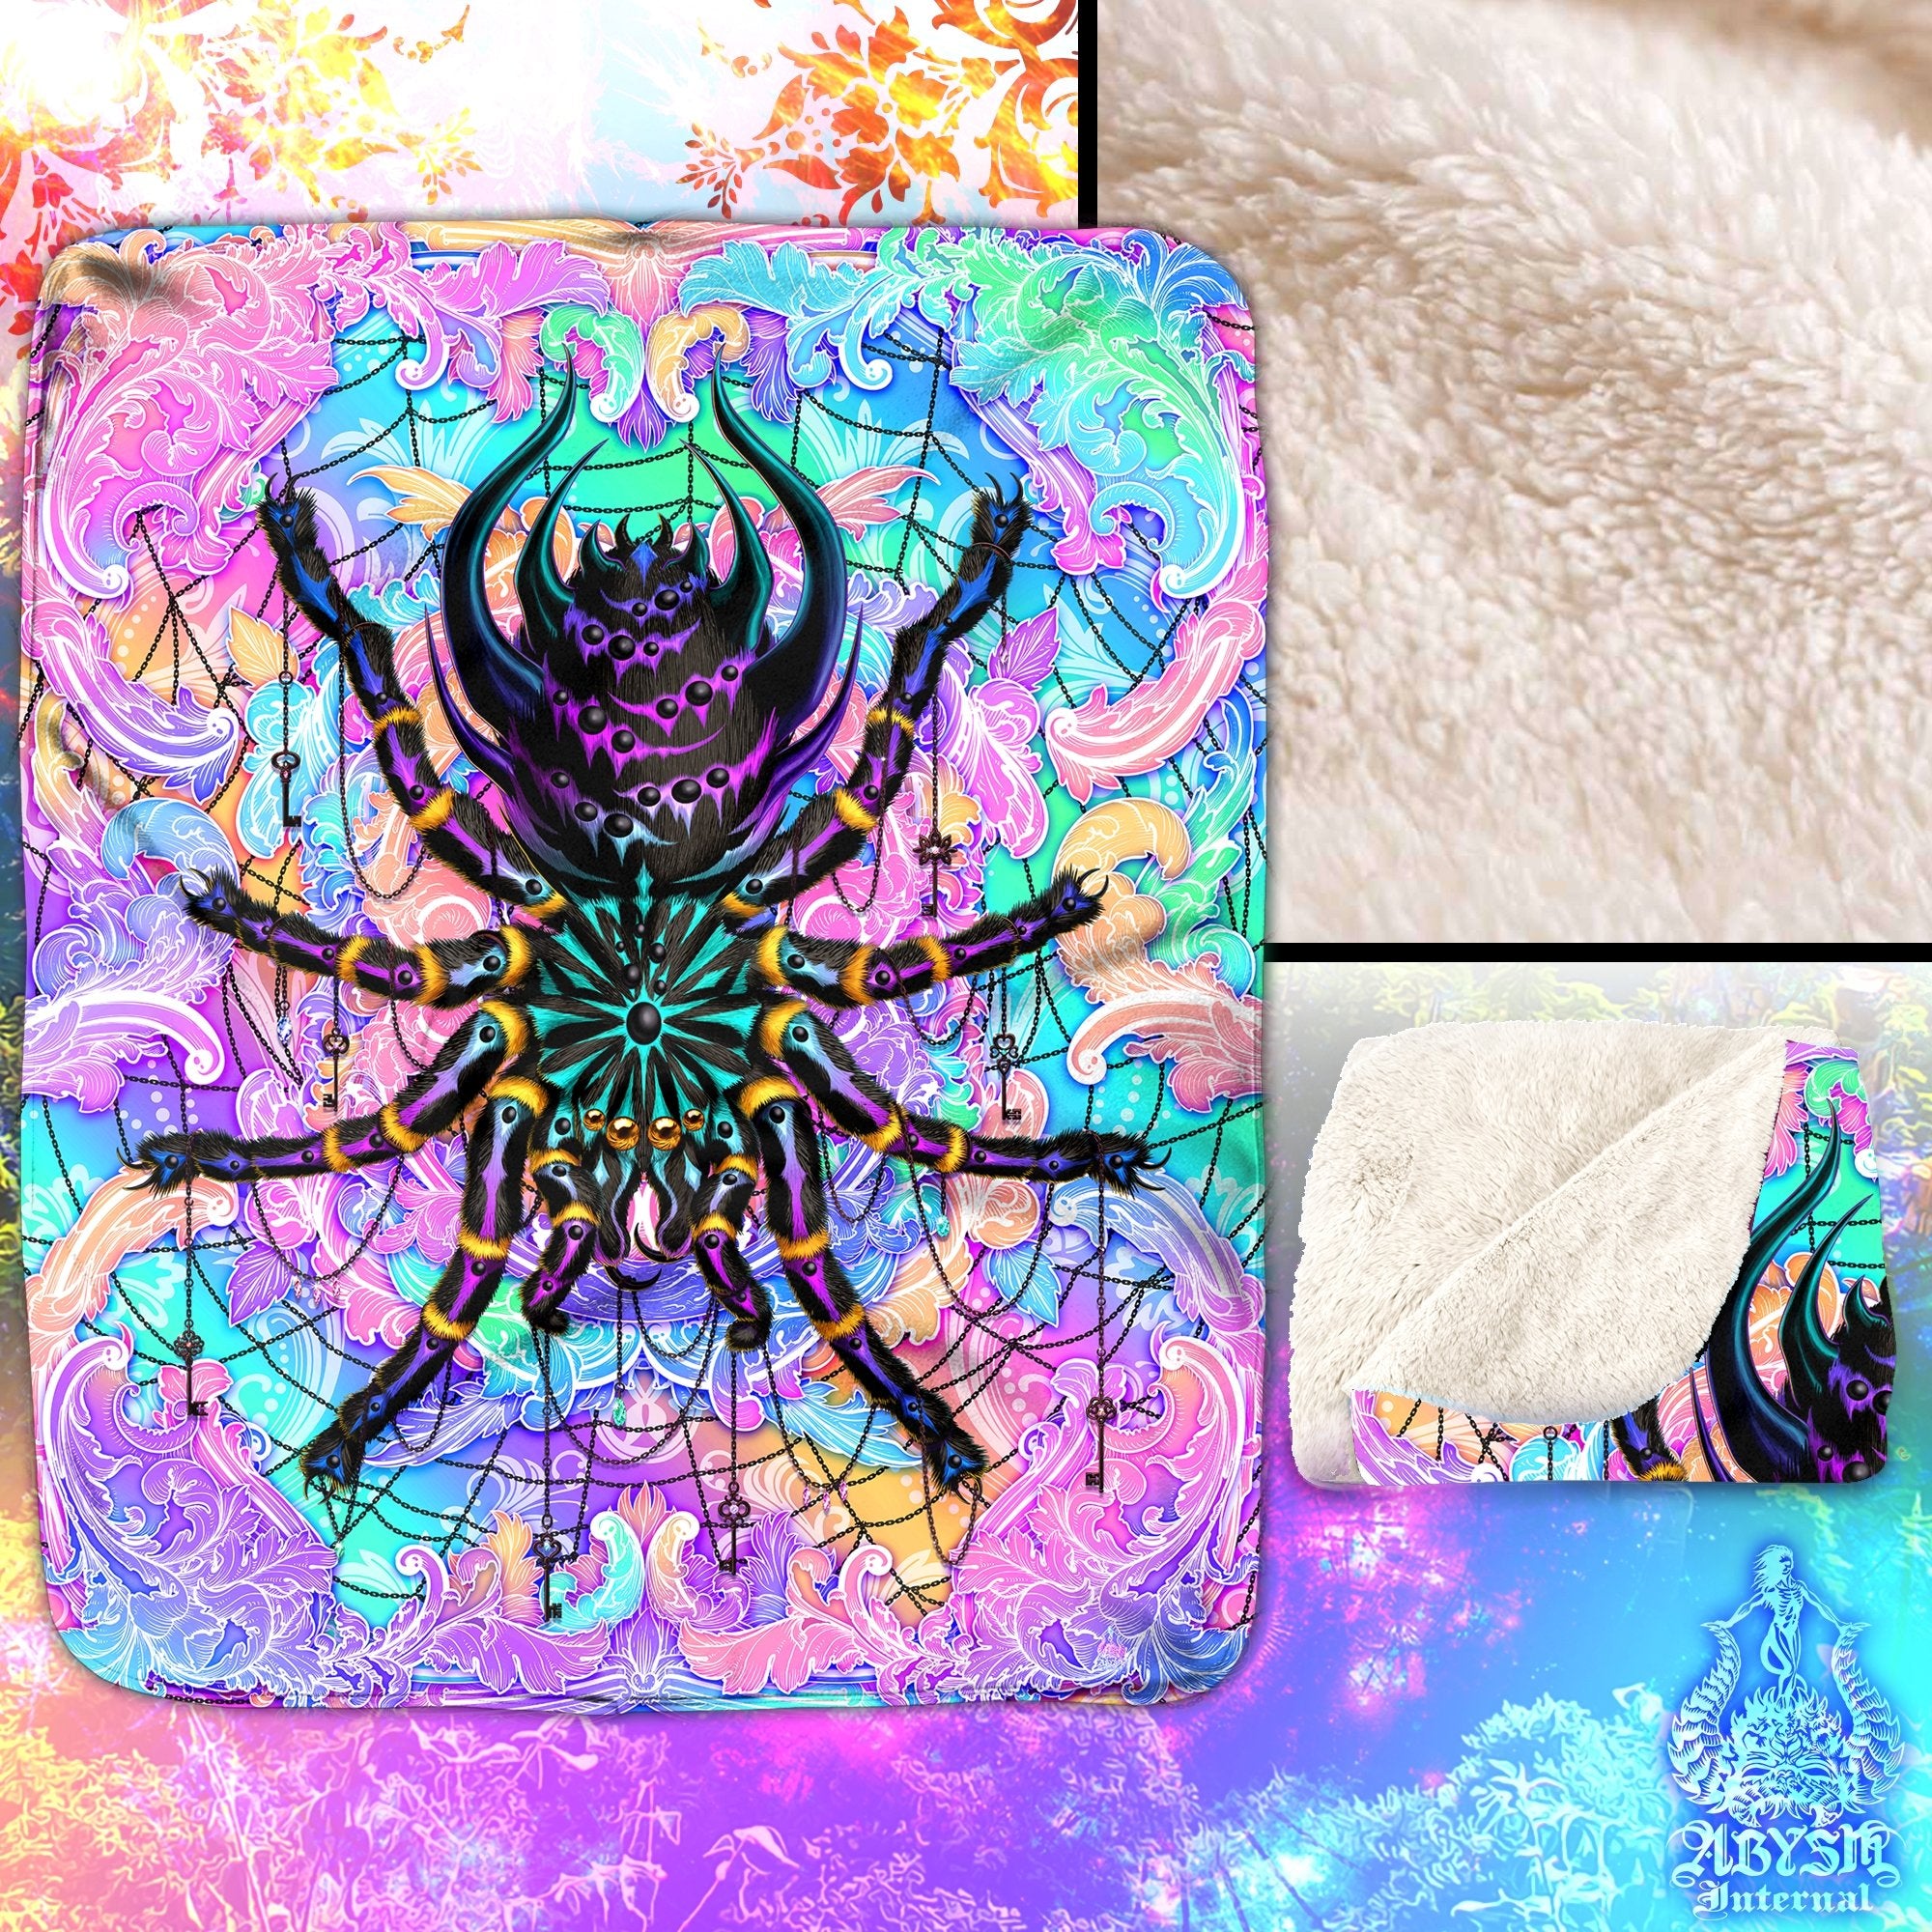 Psychedelic Throw Fleece Blanket, Aesthetic Home Decor, Holographic Gift, Eclectic and Funky Gift - Spider, Pastel Punk Black, Tarantula Art - Abysm Internal